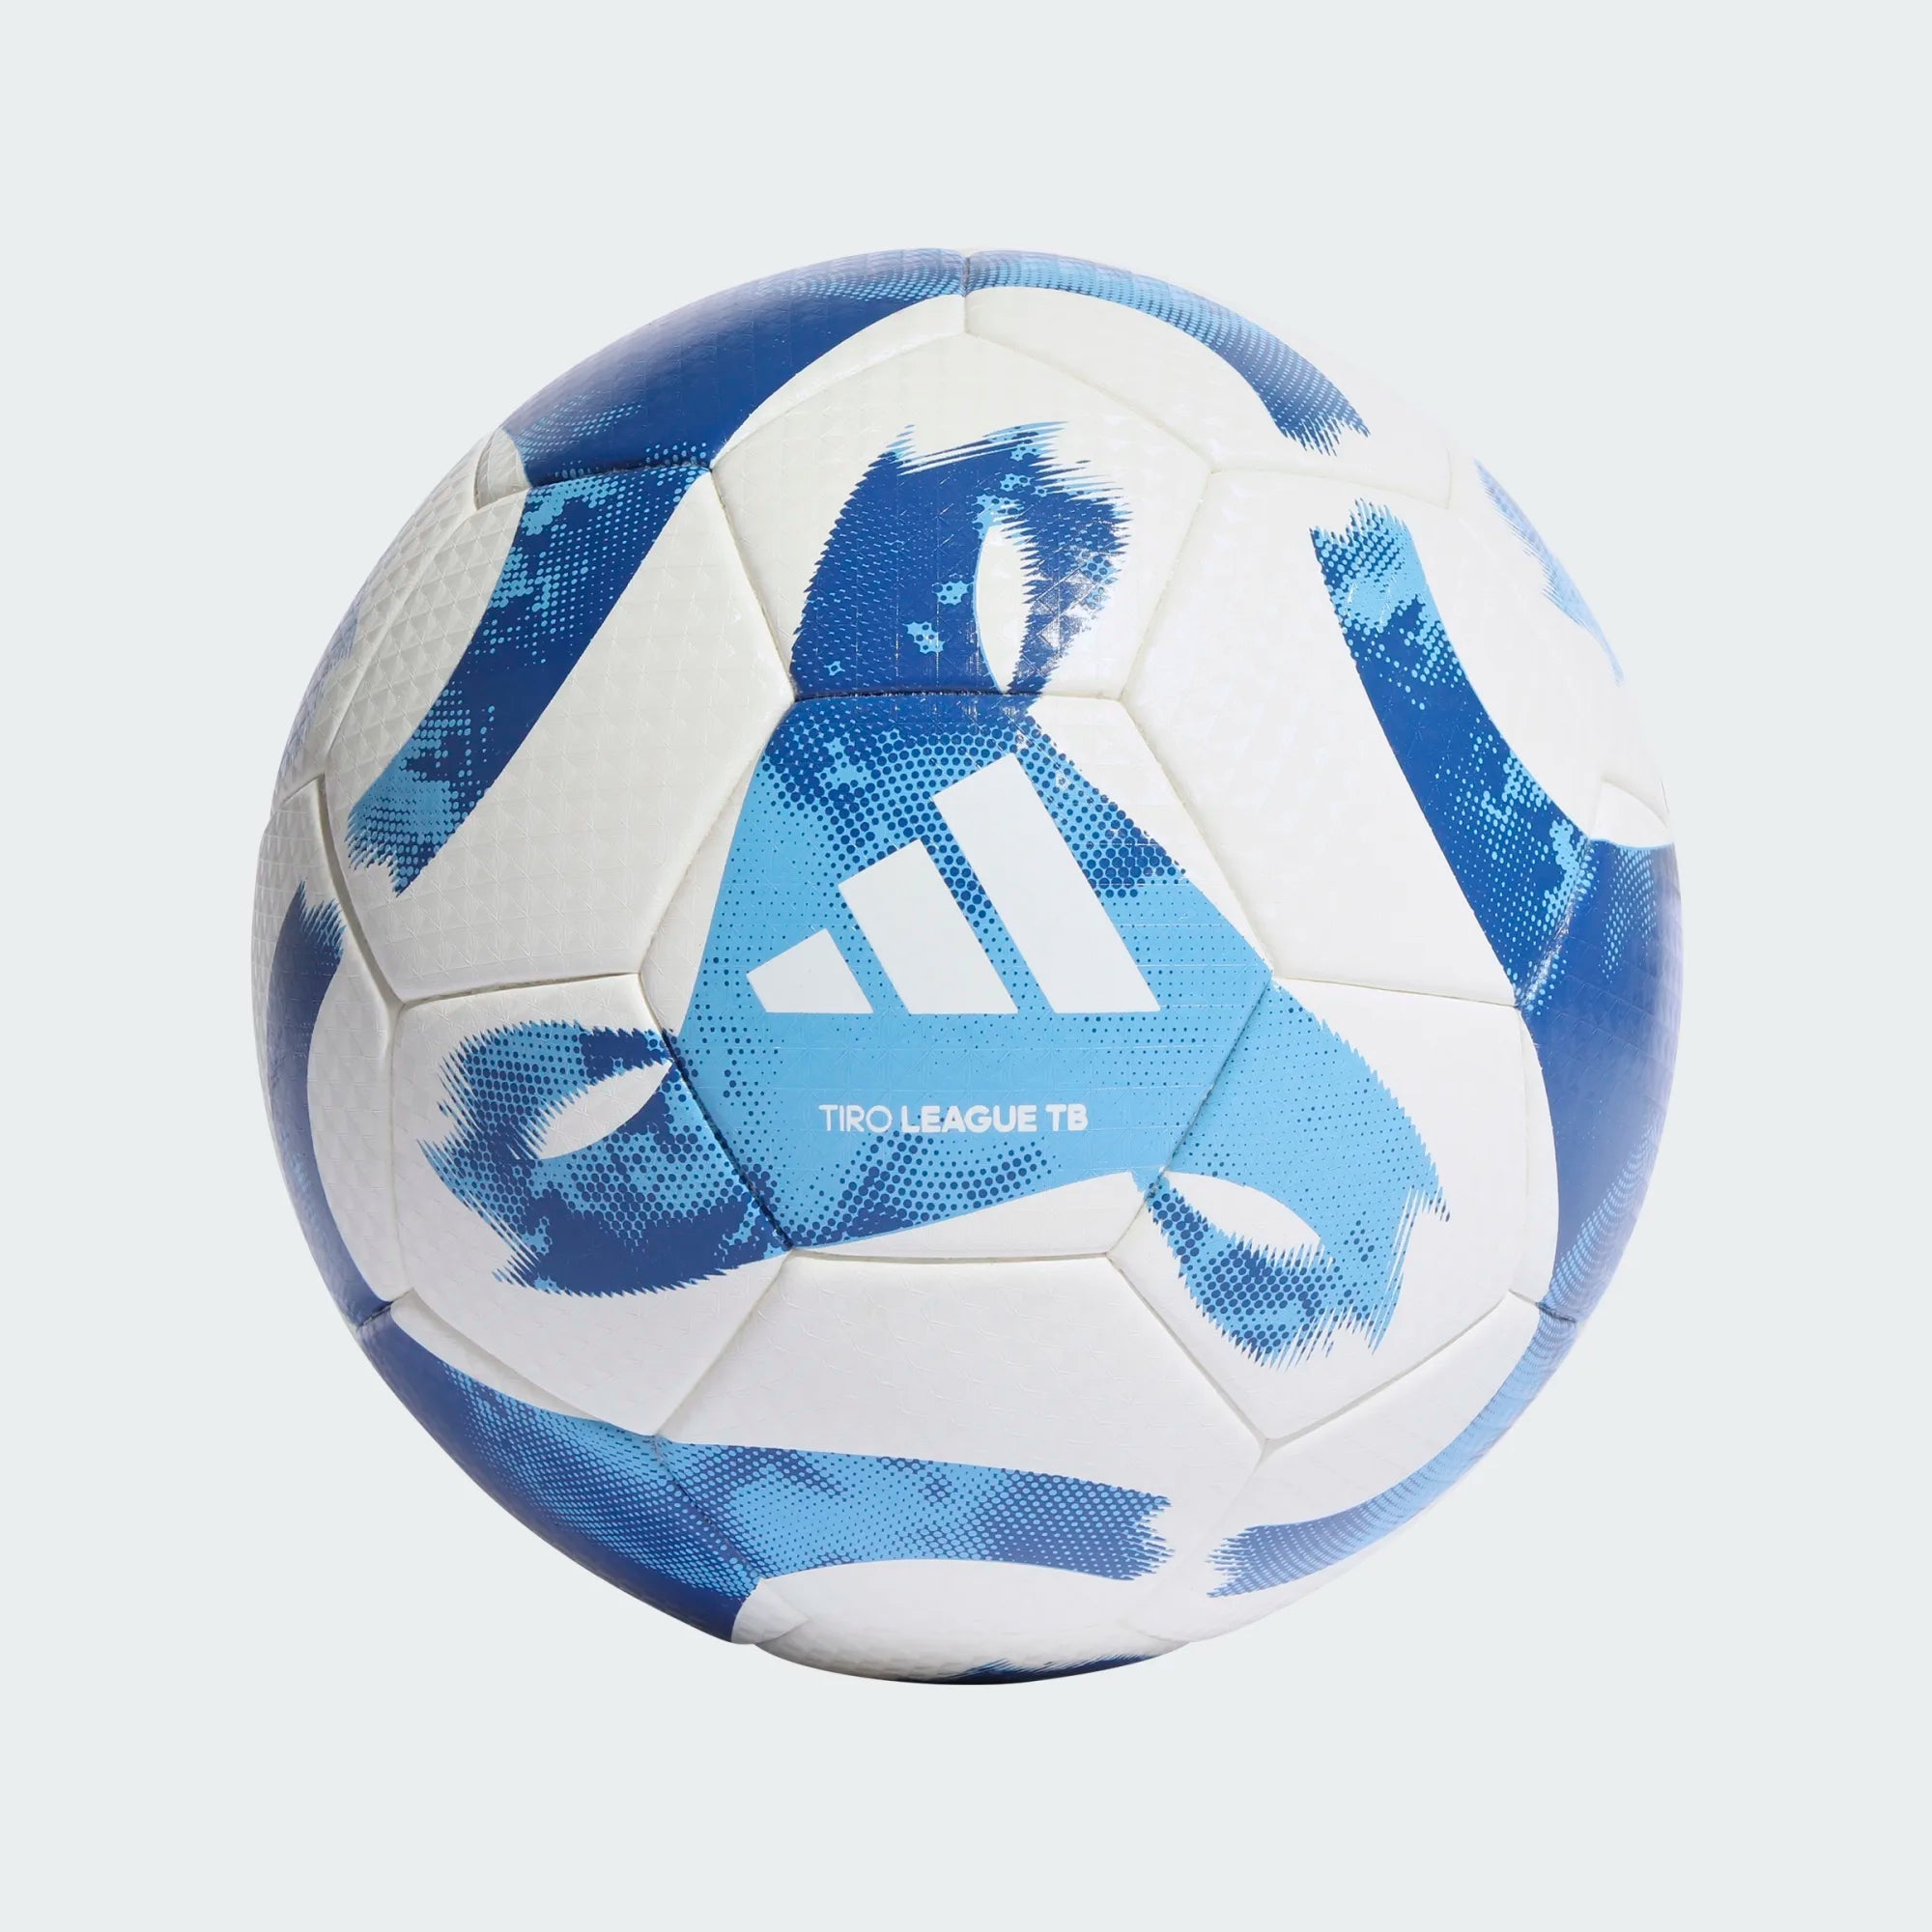 Adidas Tiro League Thermally Bonded Soccer Ball-Adidas-Sports Replay - Sports Excellence